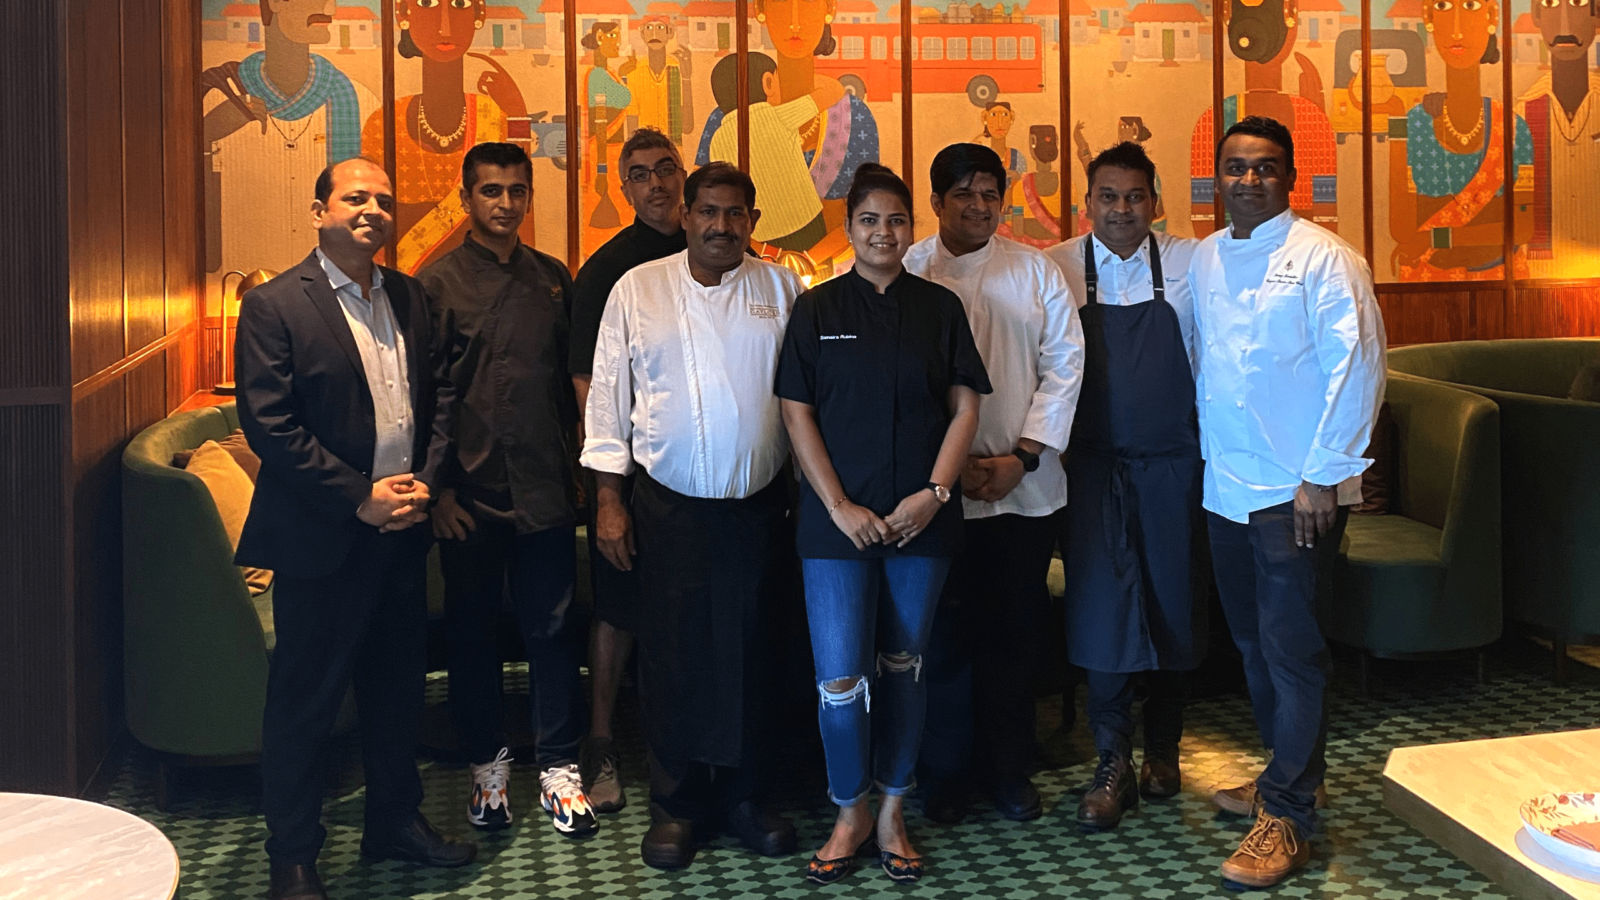 Cook for India: 8 of Hong Kong’s top Indian Chefs to host a special “16-hands” charity dinner at CHAAT